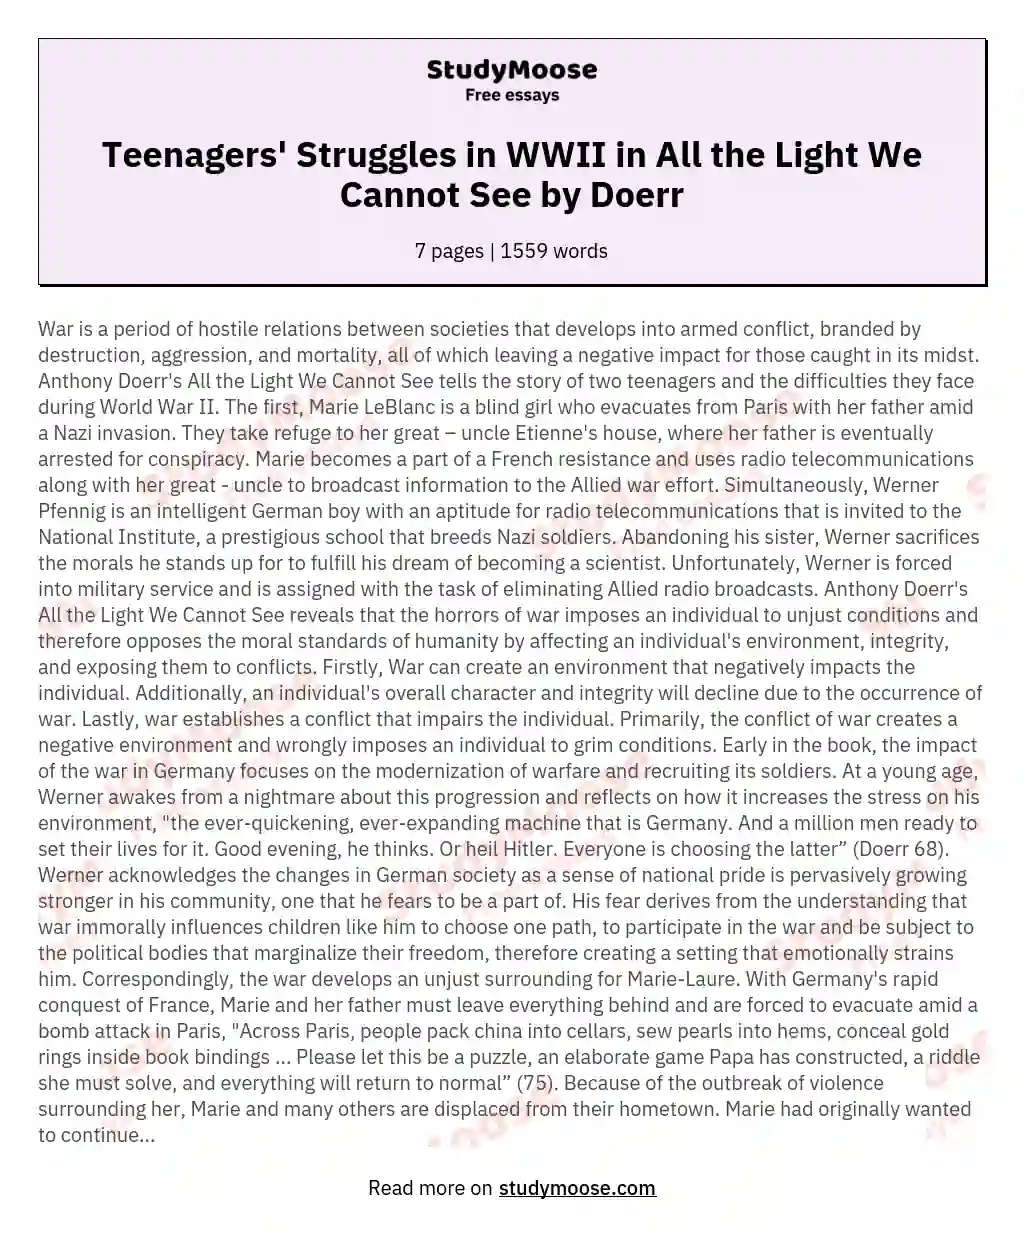 Teenagers' Struggles in WWII in All the Light We Cannot See by Doerr essay